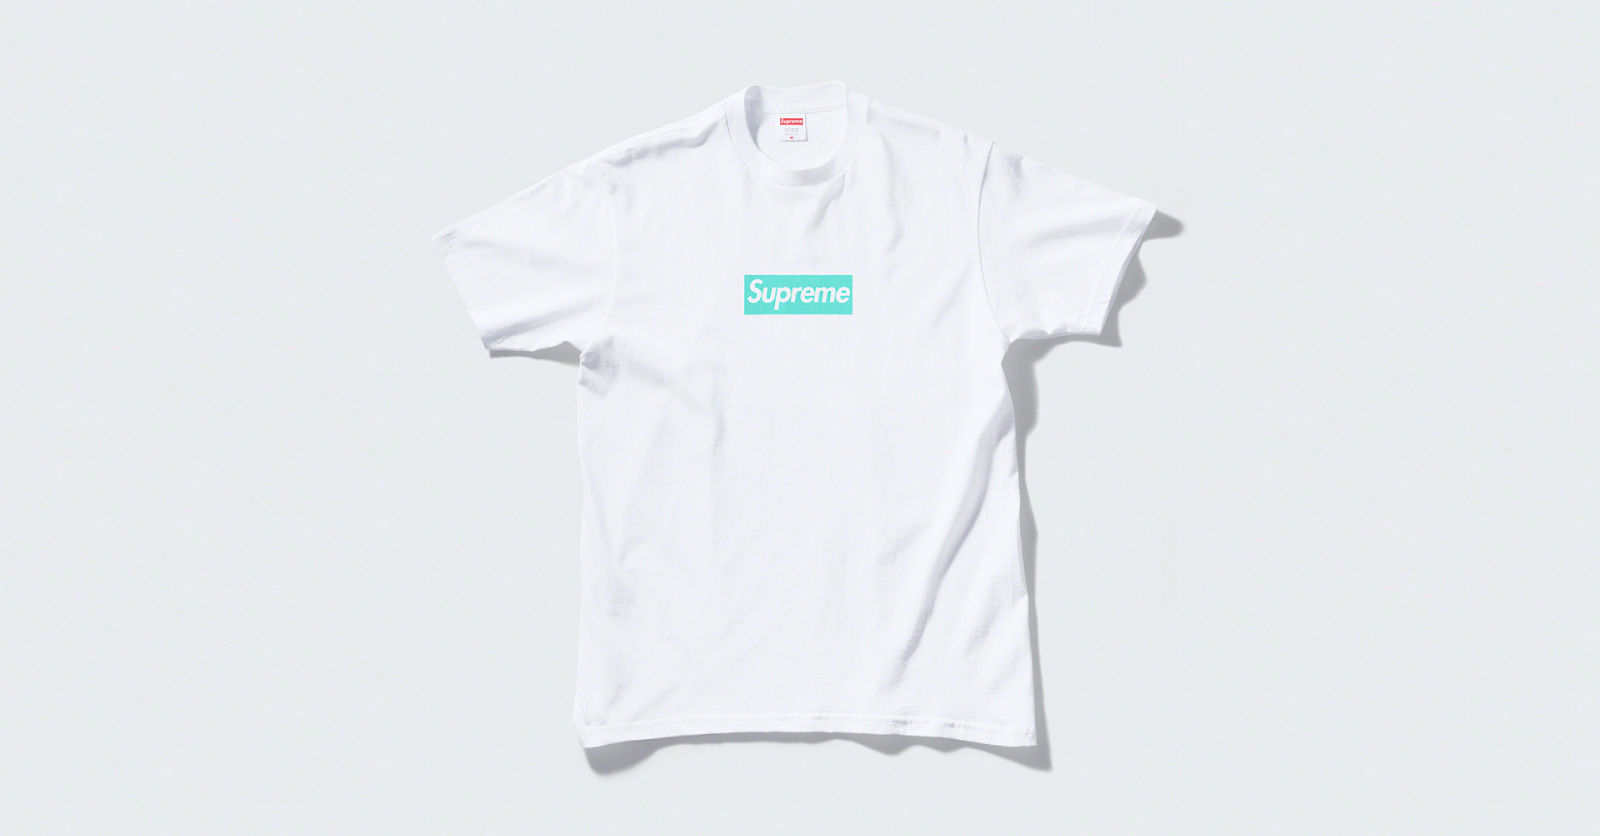 Supreme x Tiffany & Co: what to know about the Singapore release